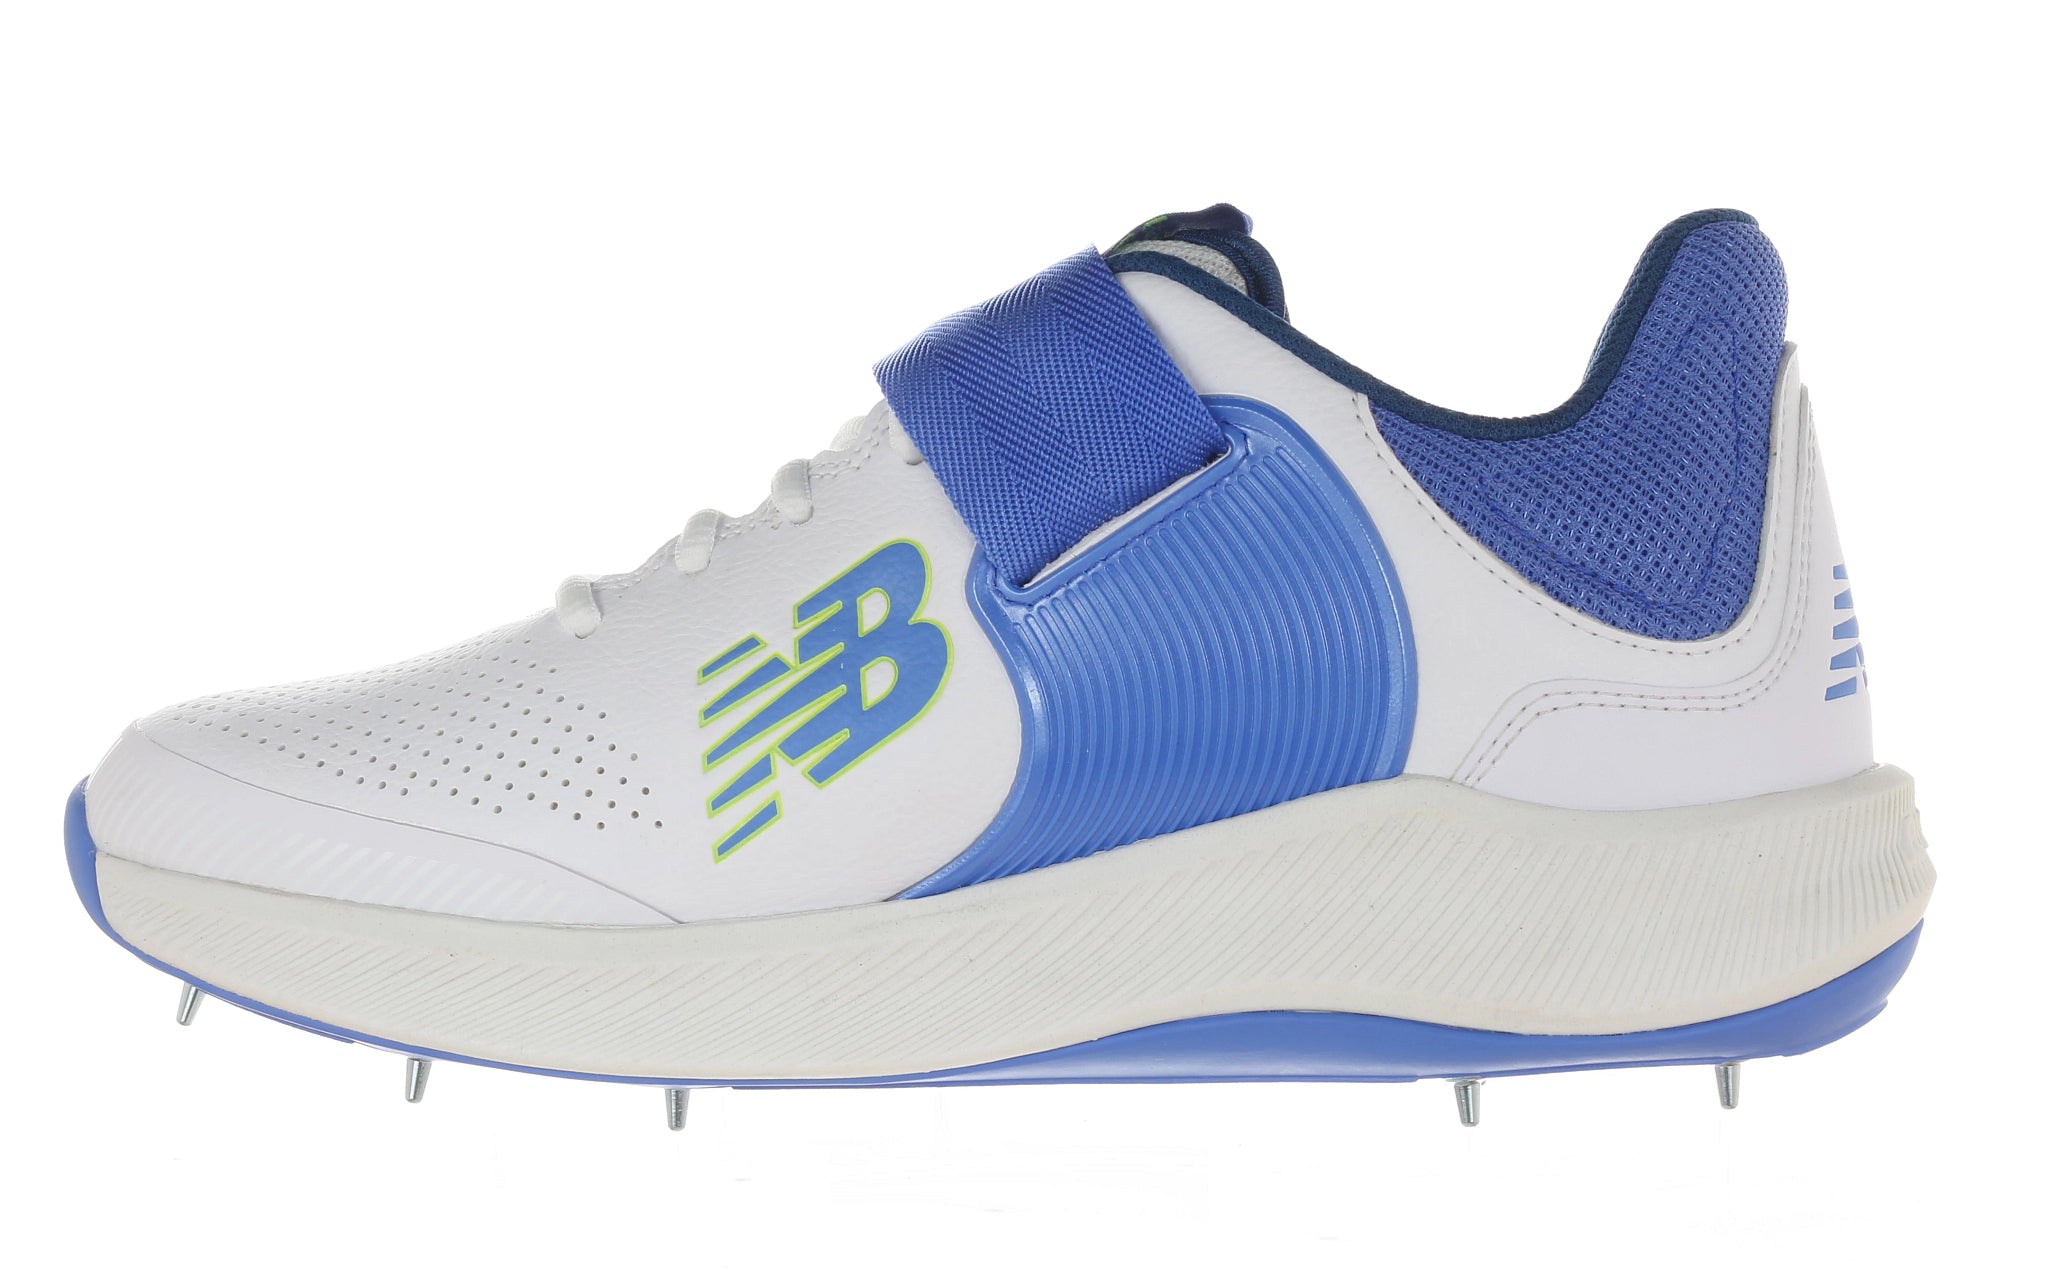 New Balance CK4040 Cricket Spikes White/Blue/Yellow - 2E Fit